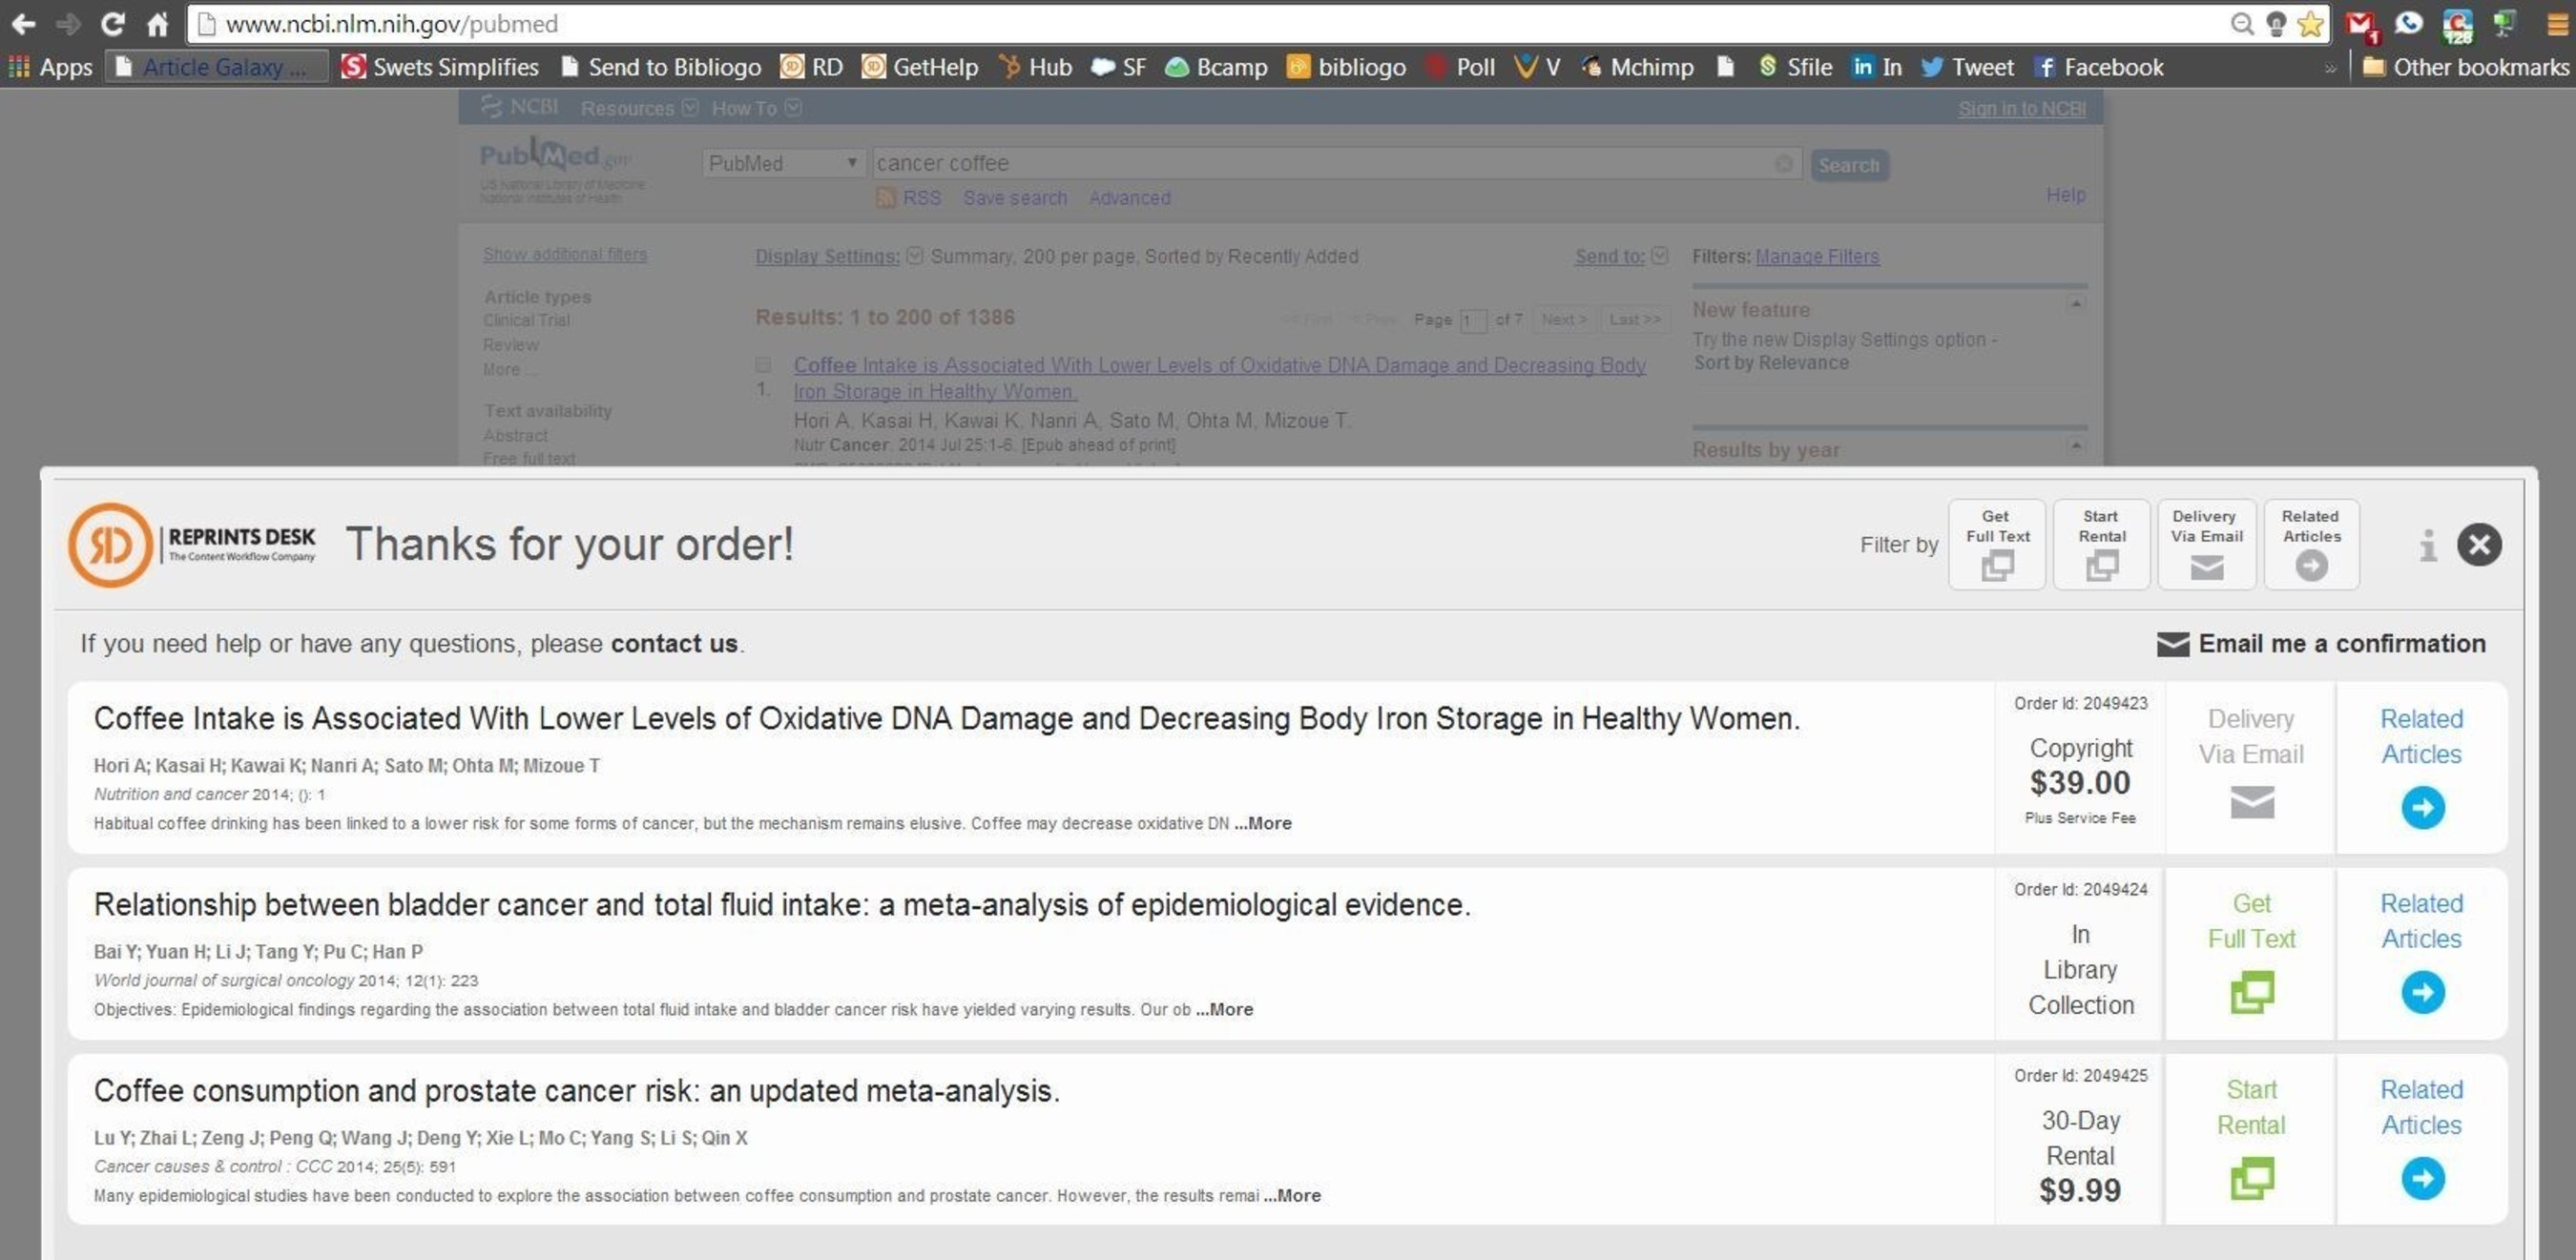 Screenshot of Article Galaxy Widget, which simplifies low cost access to full-text scholarly papers via PubMed, Google Scholar, and more than 50 popular search and discovery tools.